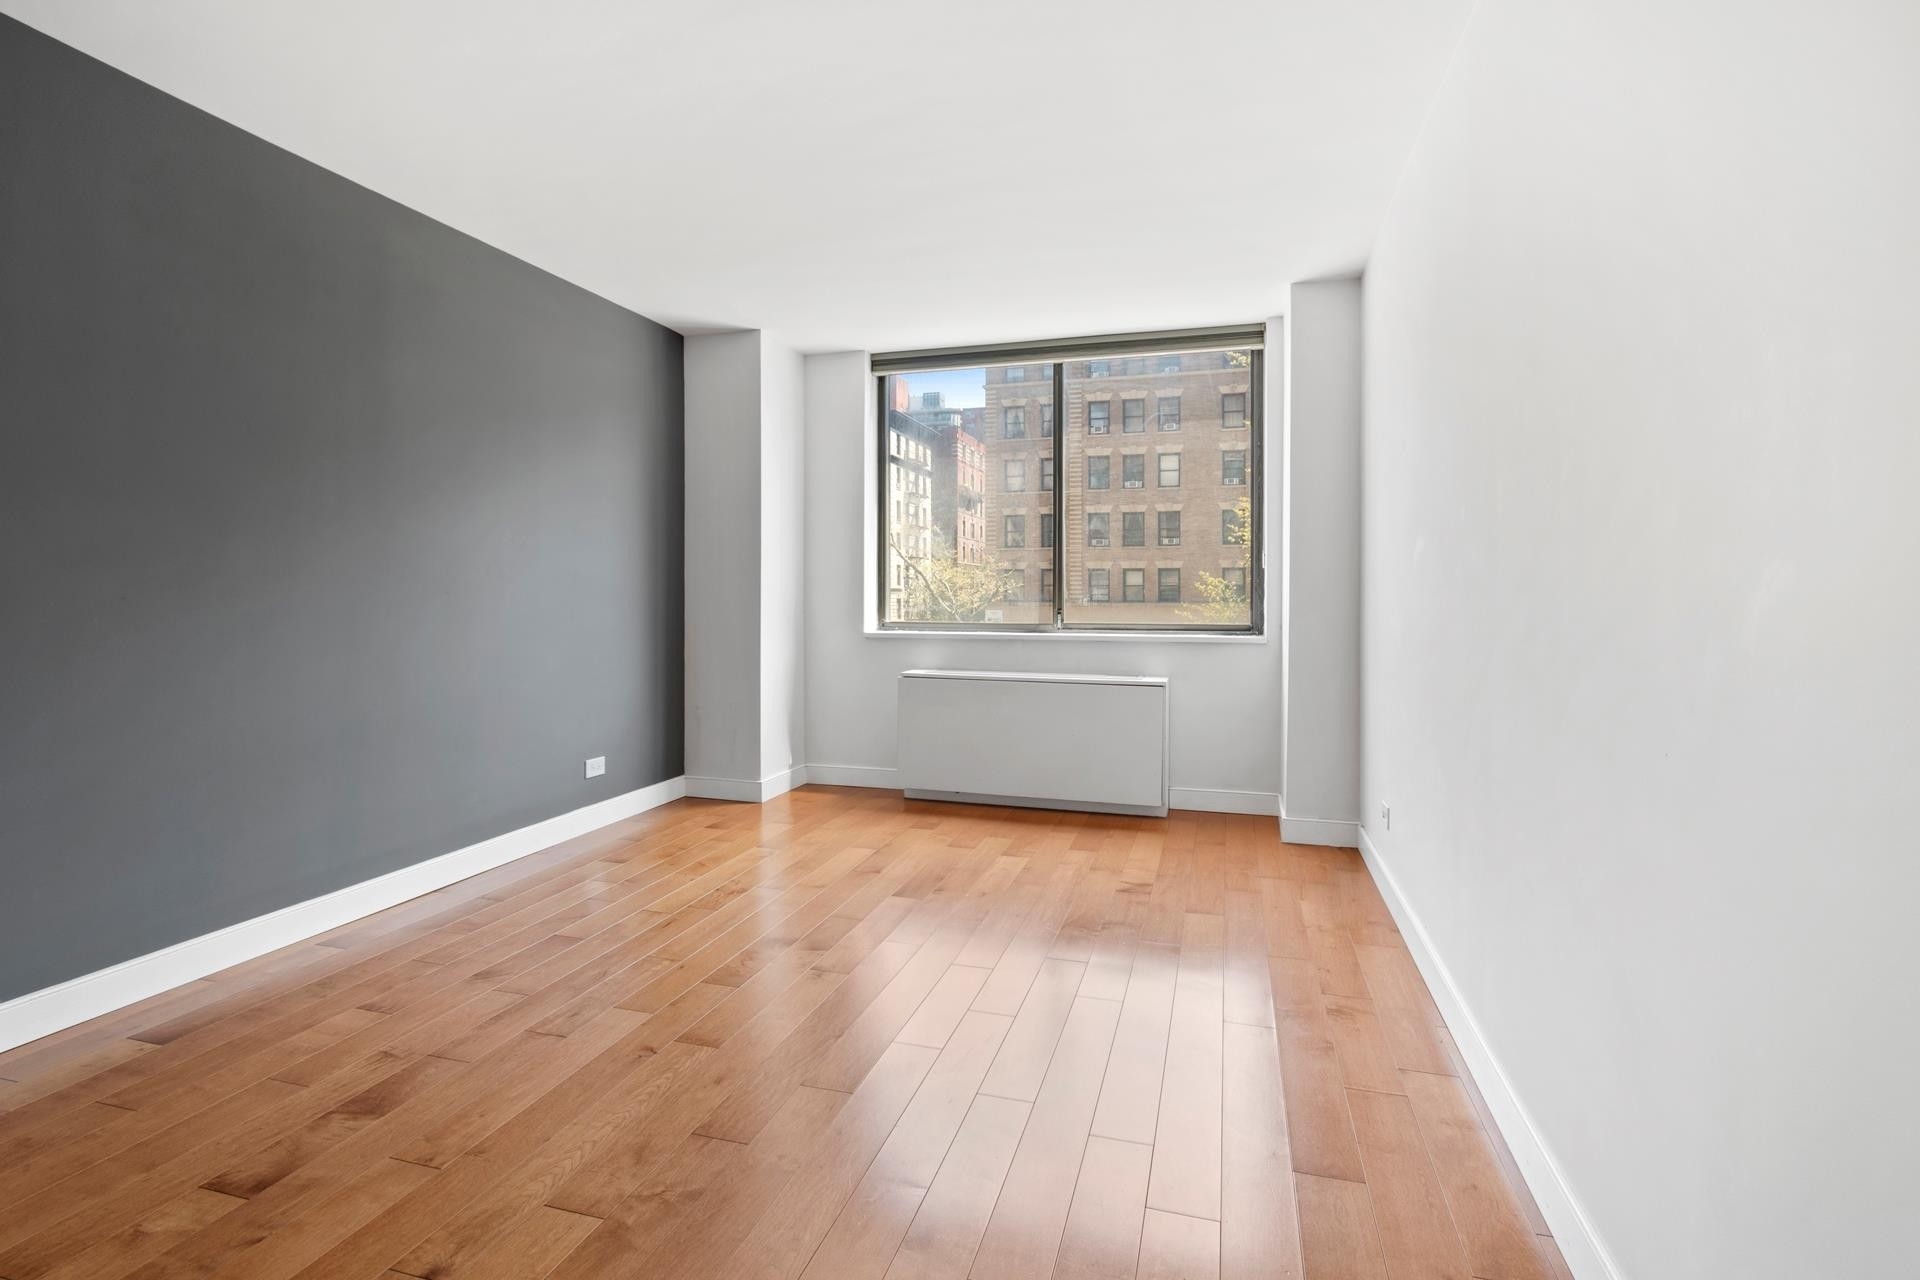 Property at The Columbia, 275 W 96TH ST , 5M New York